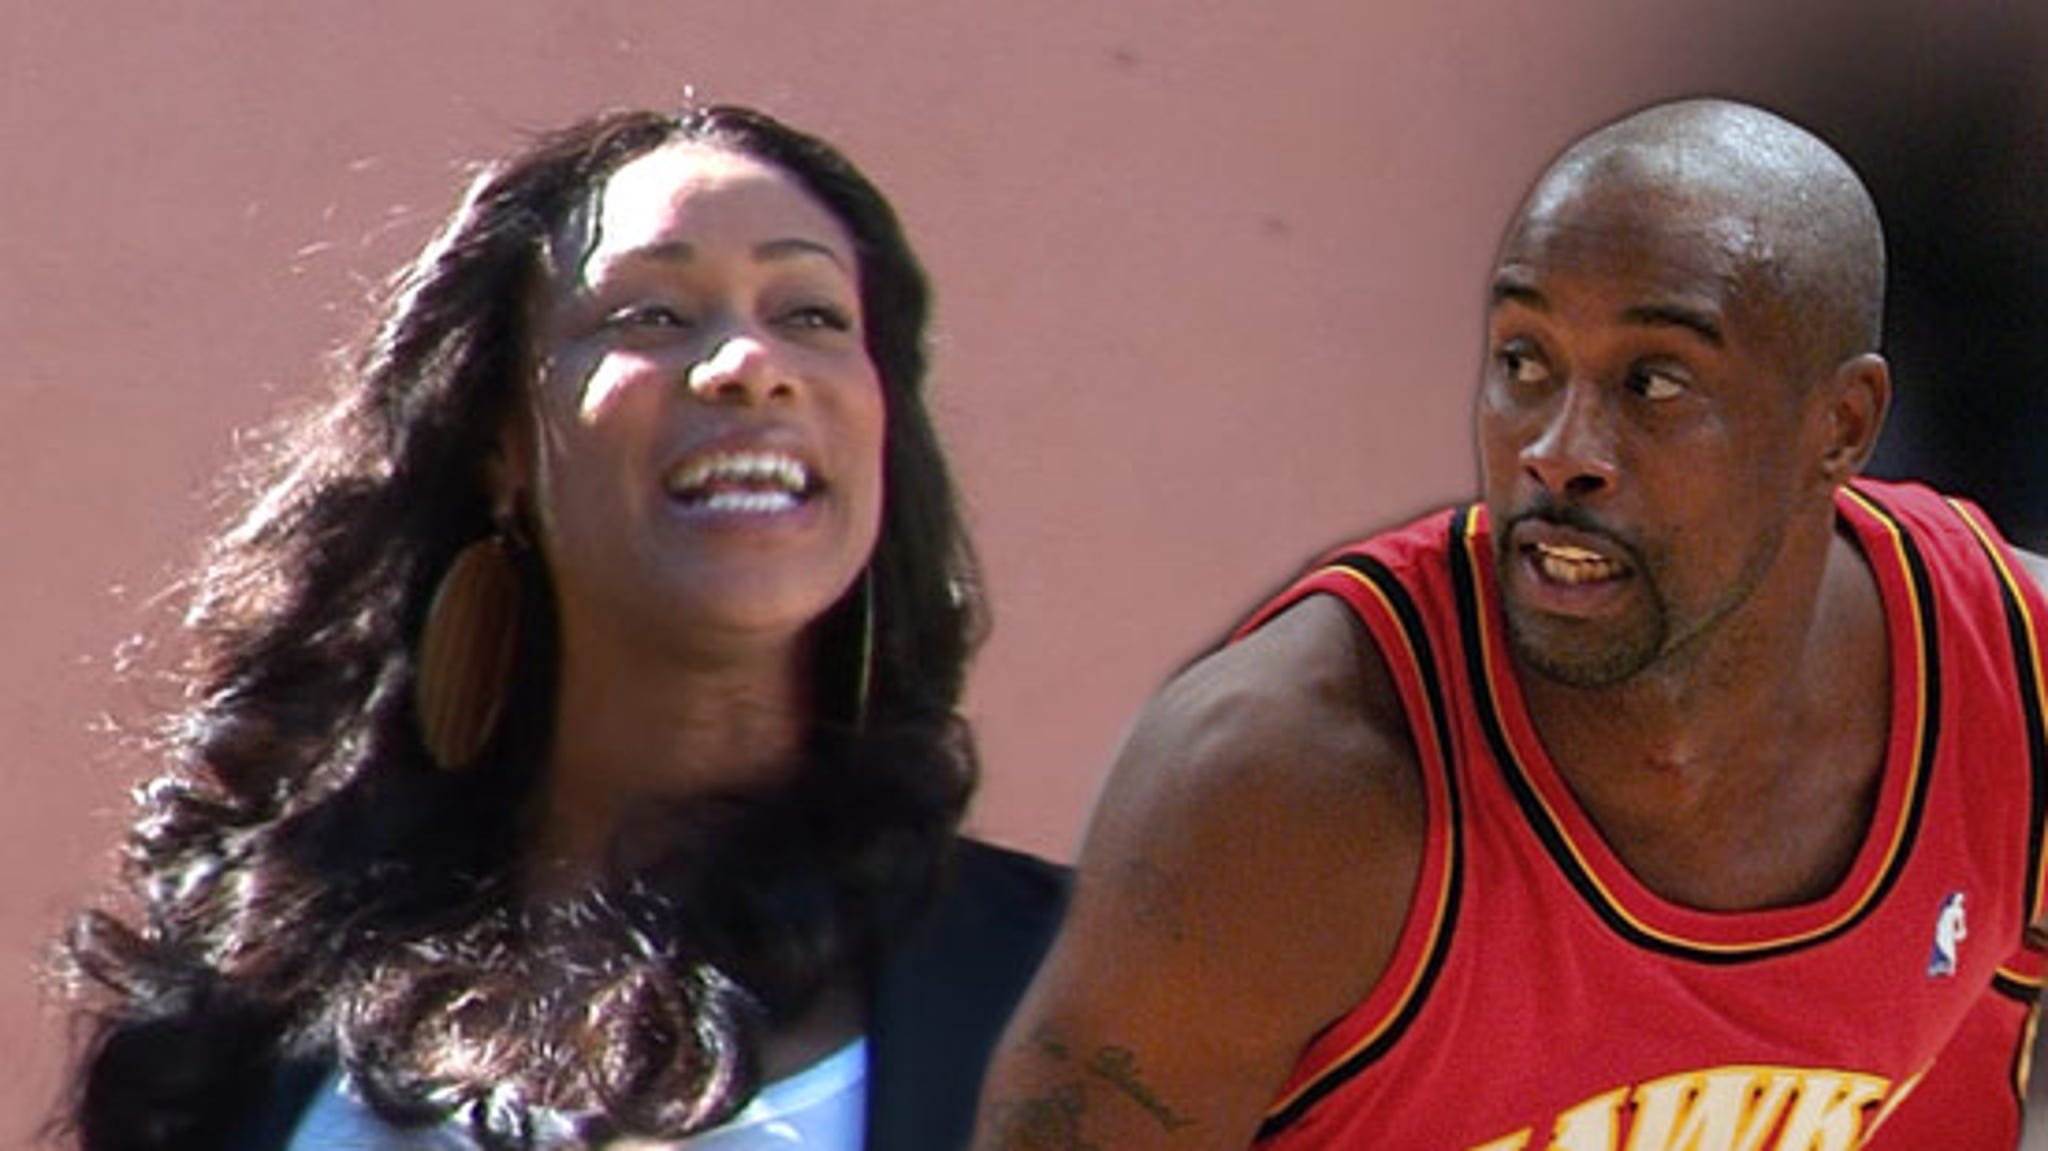 Why Tami Roman Told Husband He Could Have a Baby With Another Woman